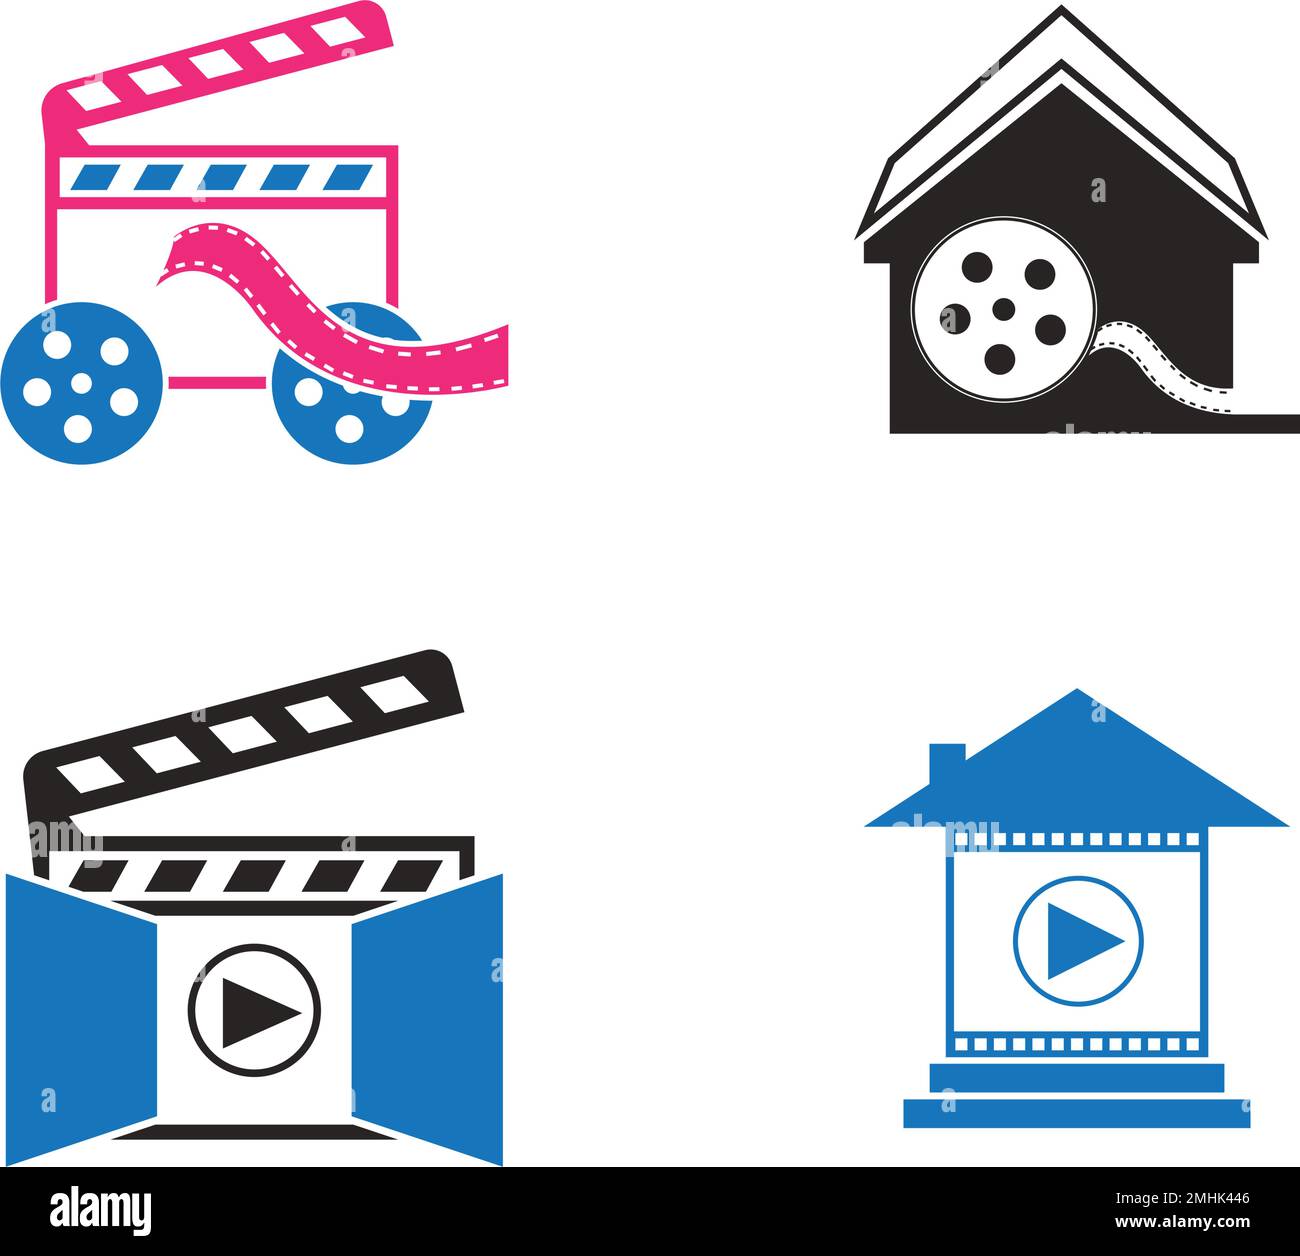 production house or film industry logo. vector illustration design template. Stock Vector